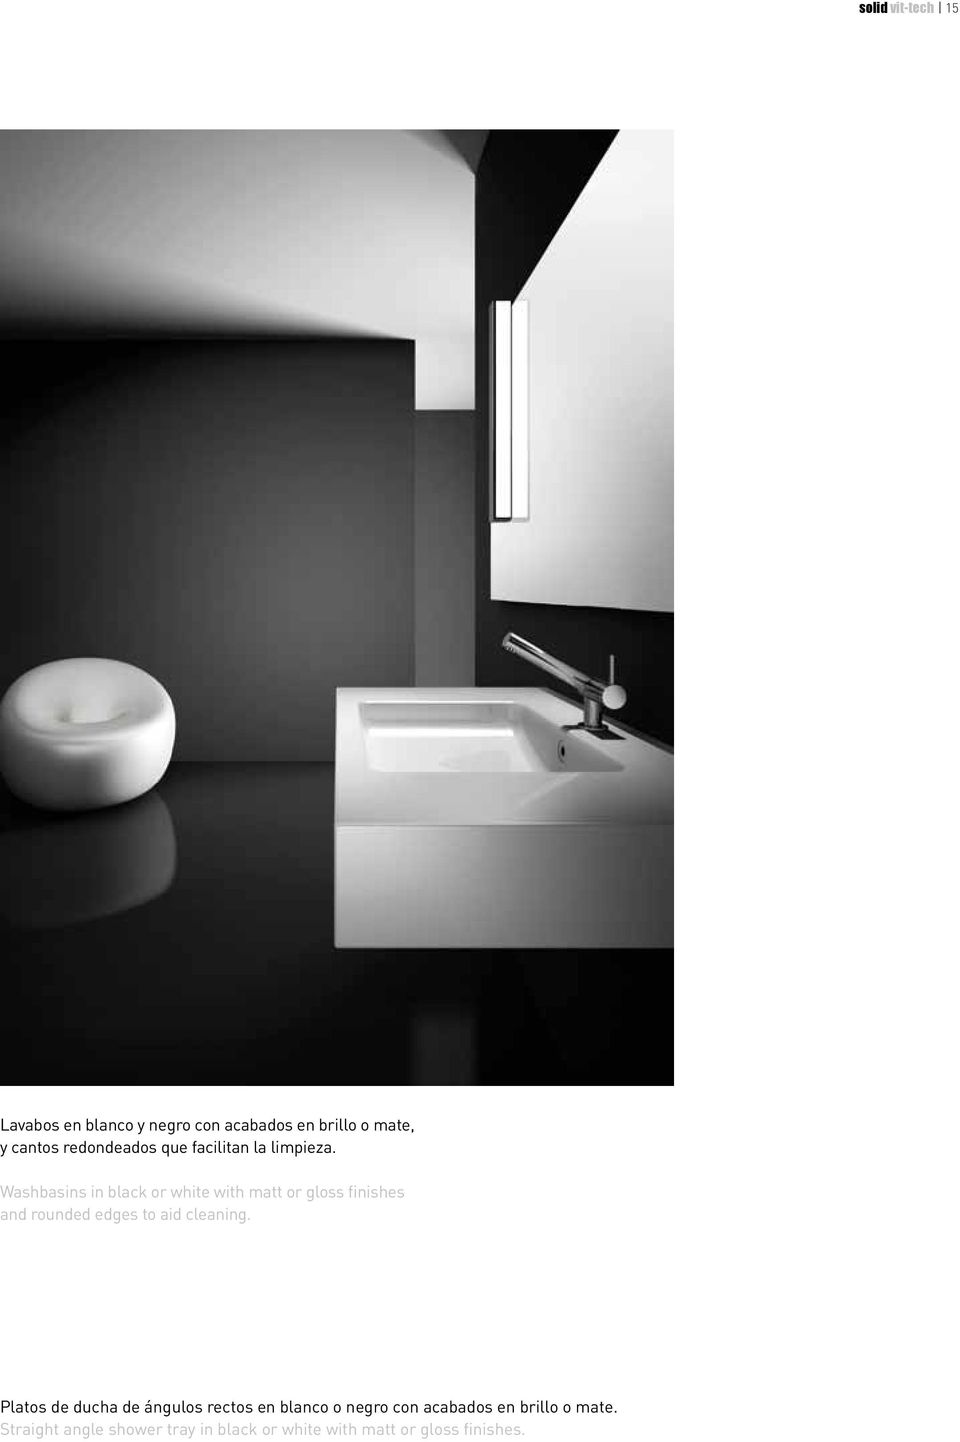 Washbasins in black or white with matt or gloss finishes and rounded edges to aid cleaning.